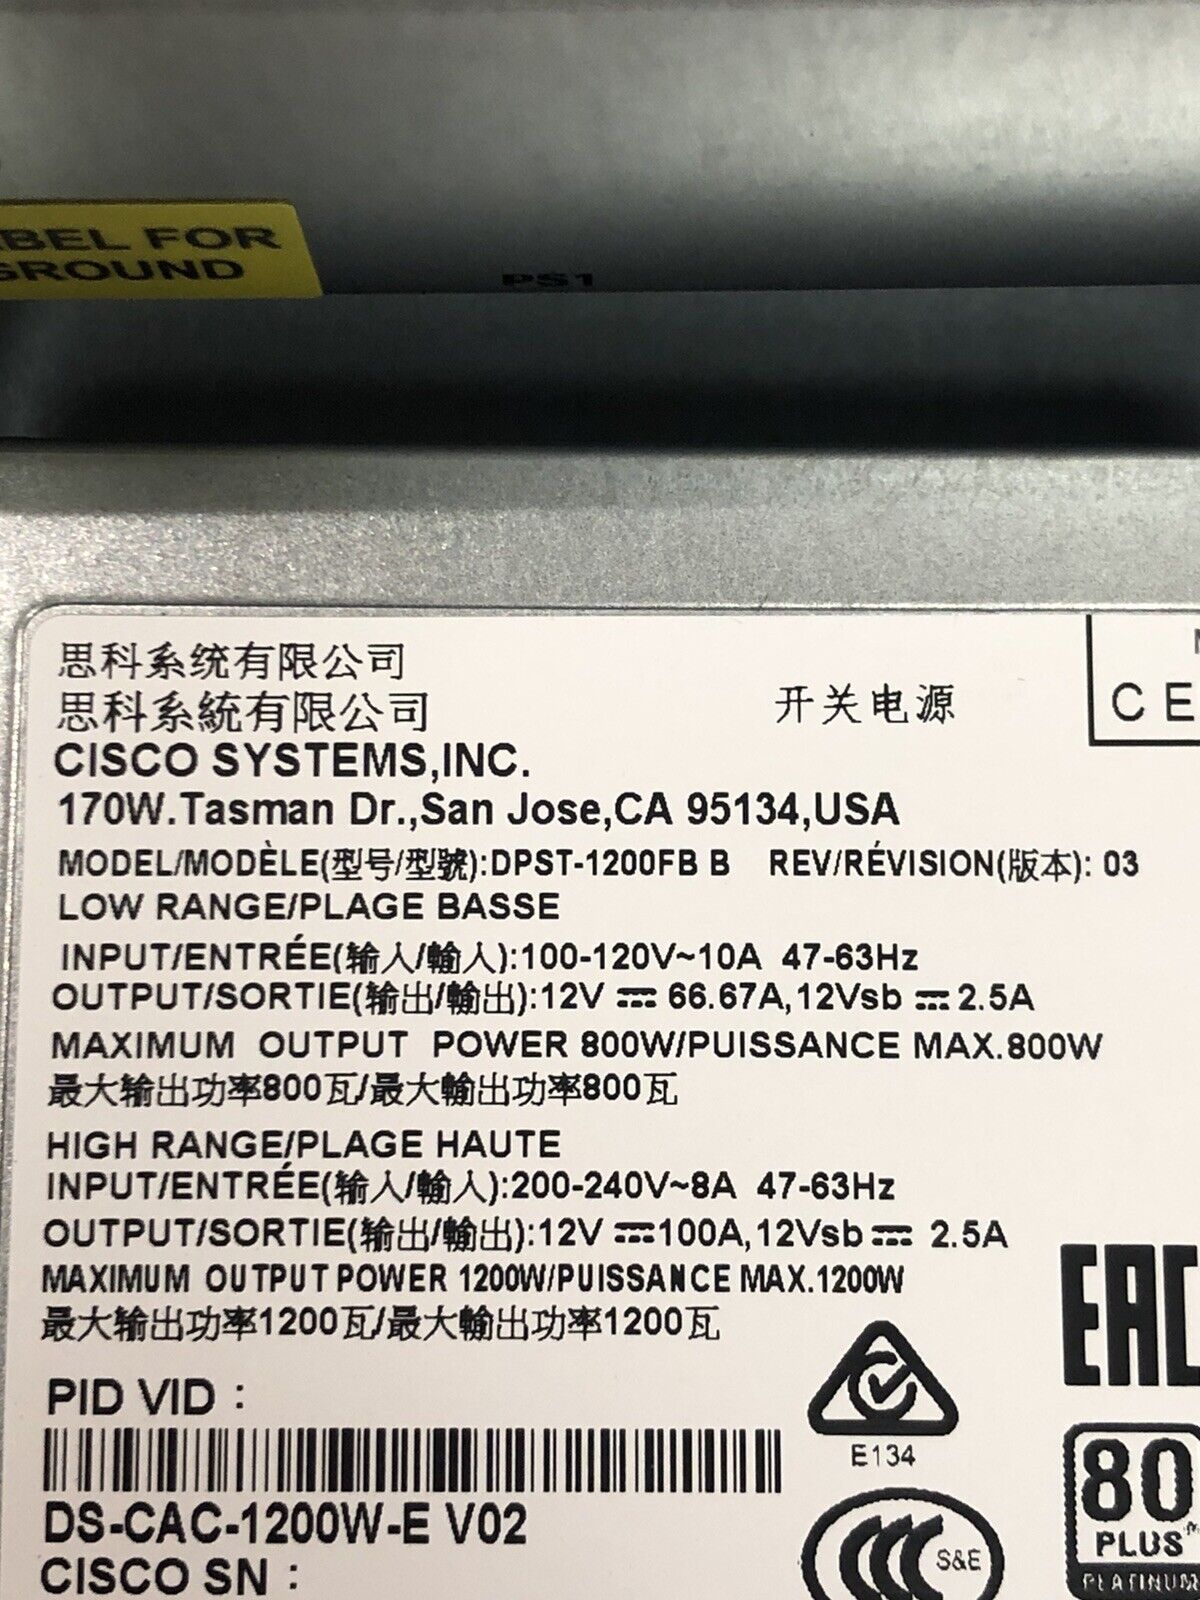 Cisco DS-C9396S 16G FC Fabric Switch 48 Active Ports Port Side Exhaust 2x AC PSU.